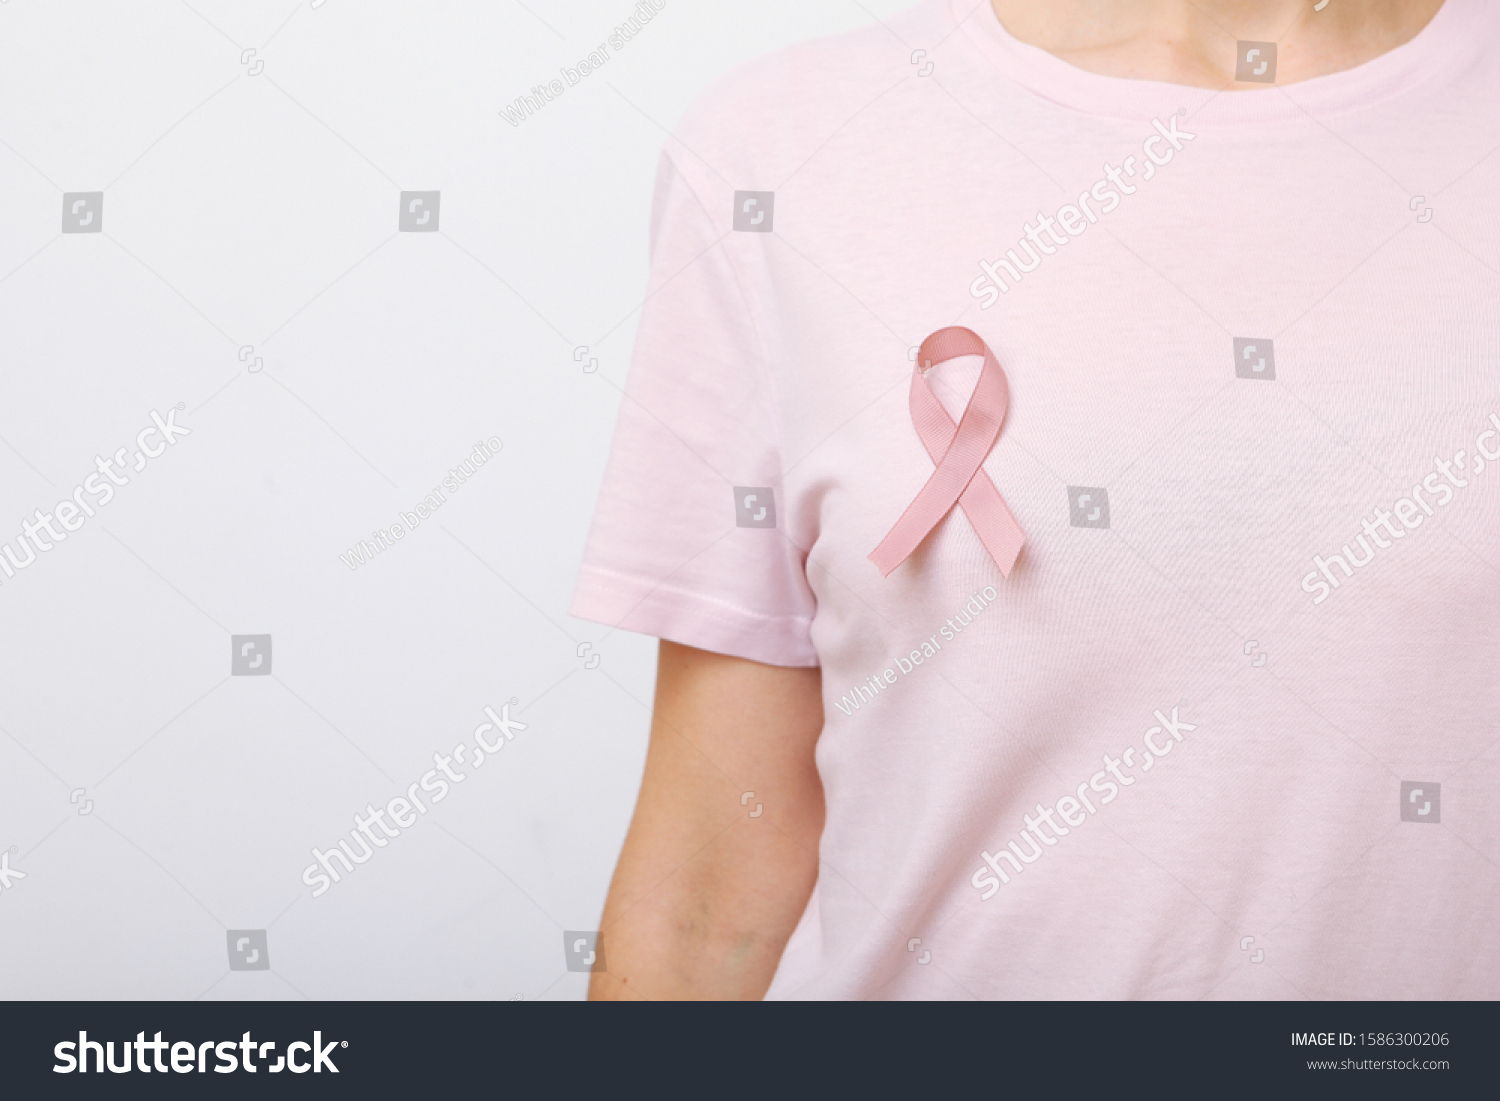 Pink ribbon, the international symbol of breast cancer.
 #1586300206